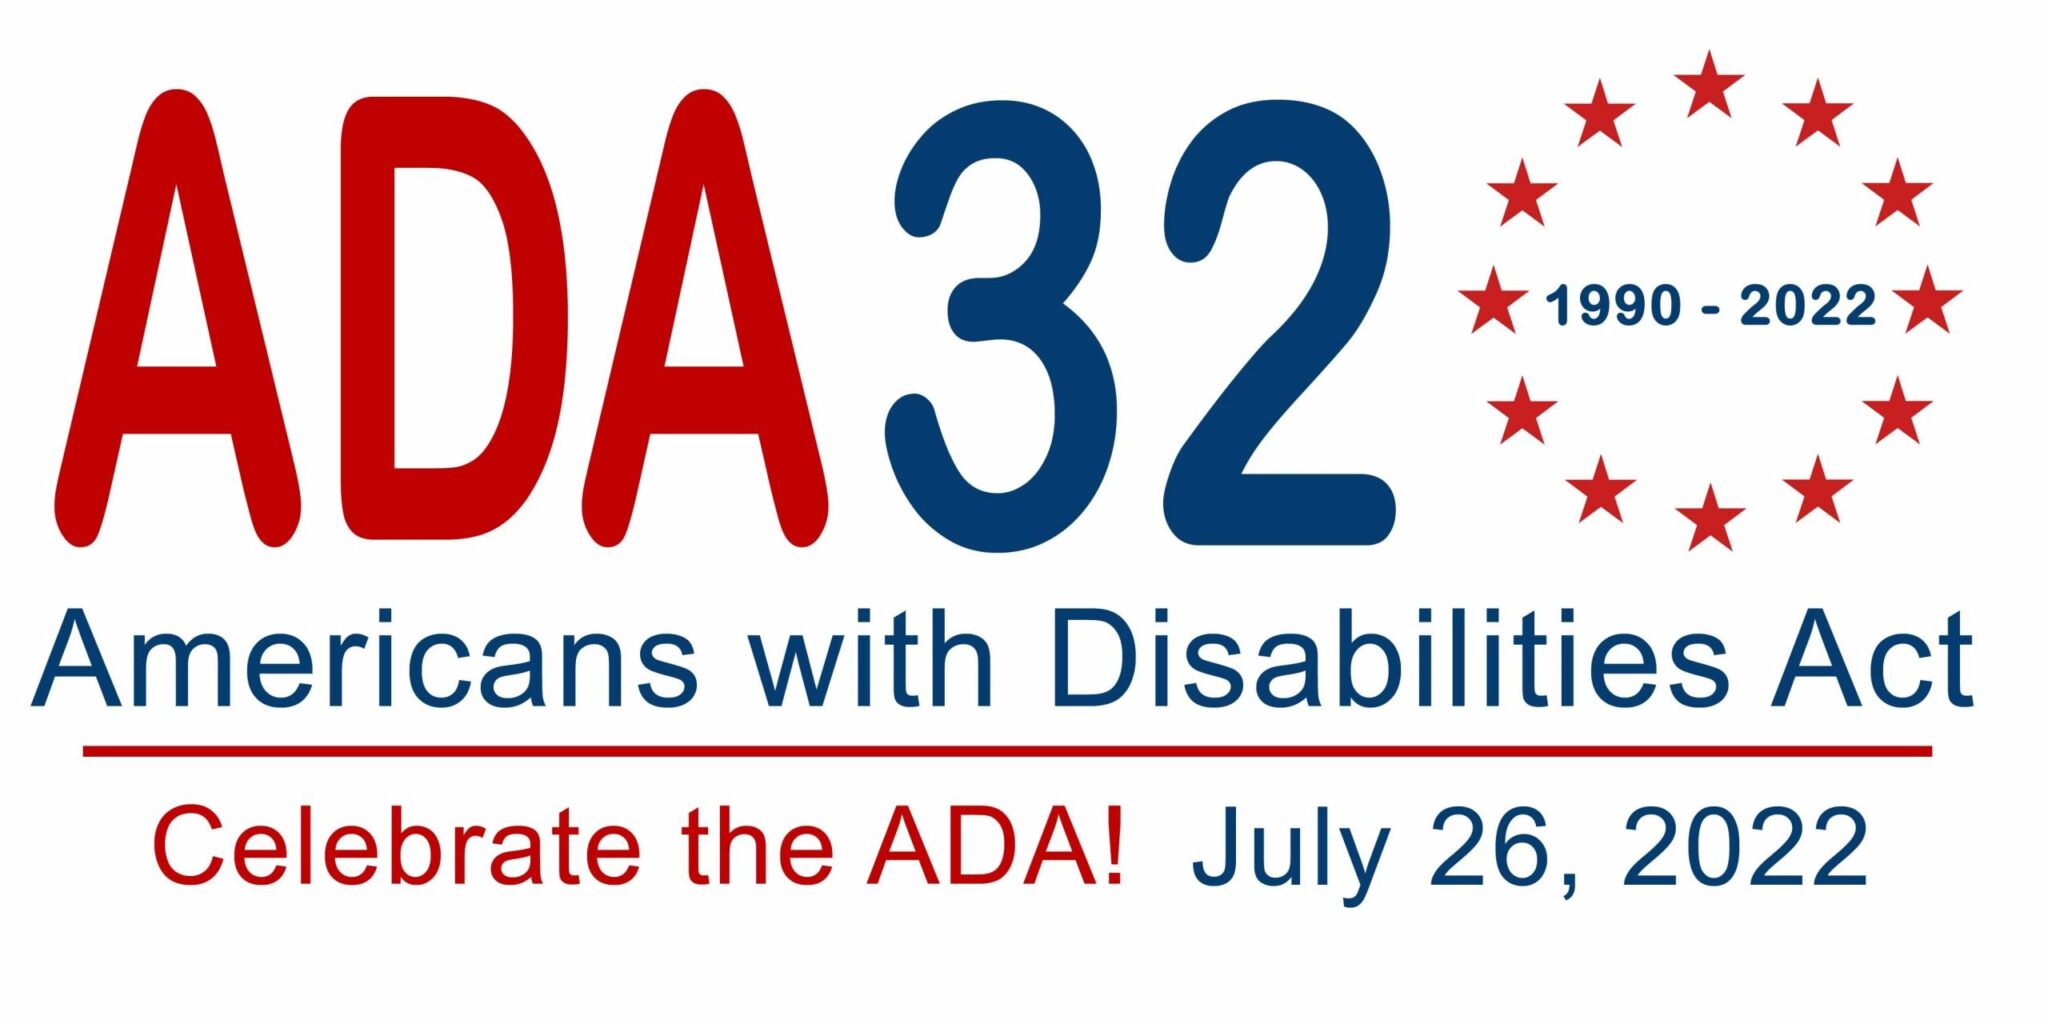 The Americans with Disabilities Act Anniversary